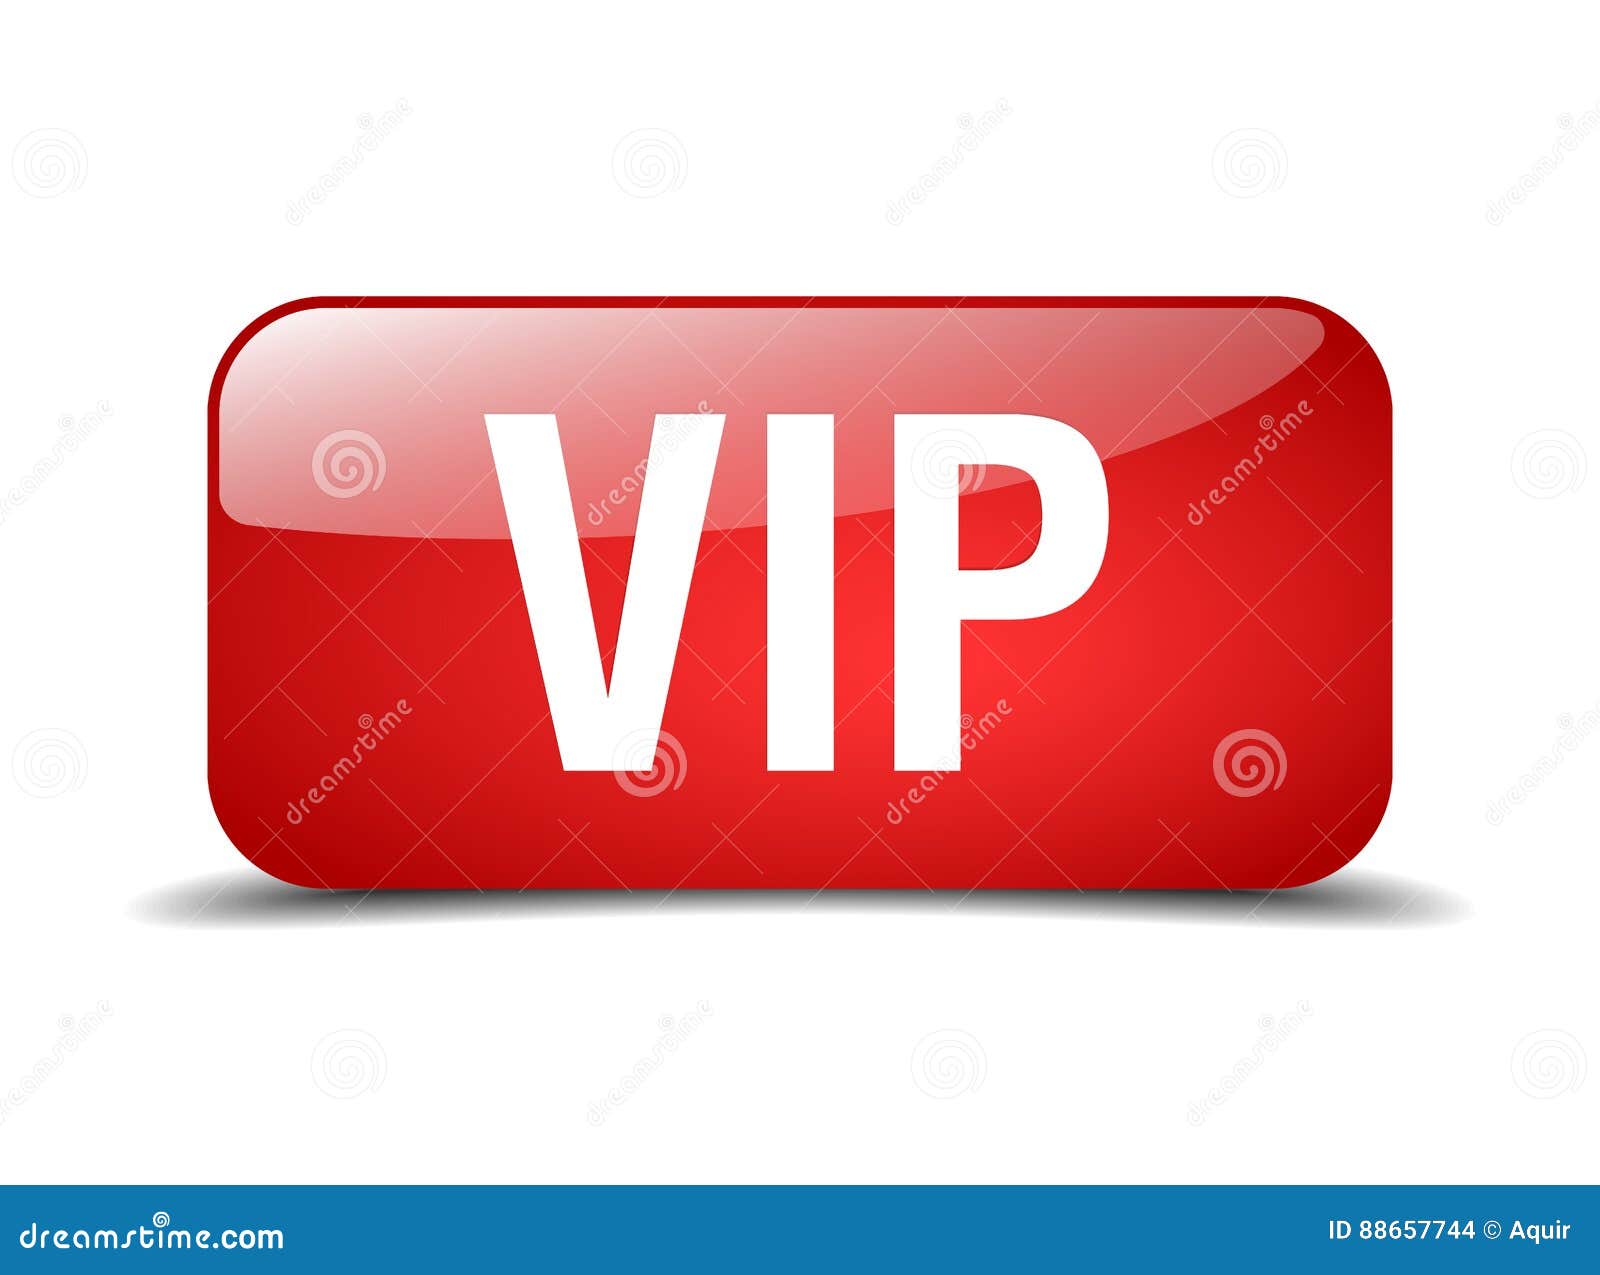 Vip Red Square Isolated Web Button Stock Vector - Illustration of push